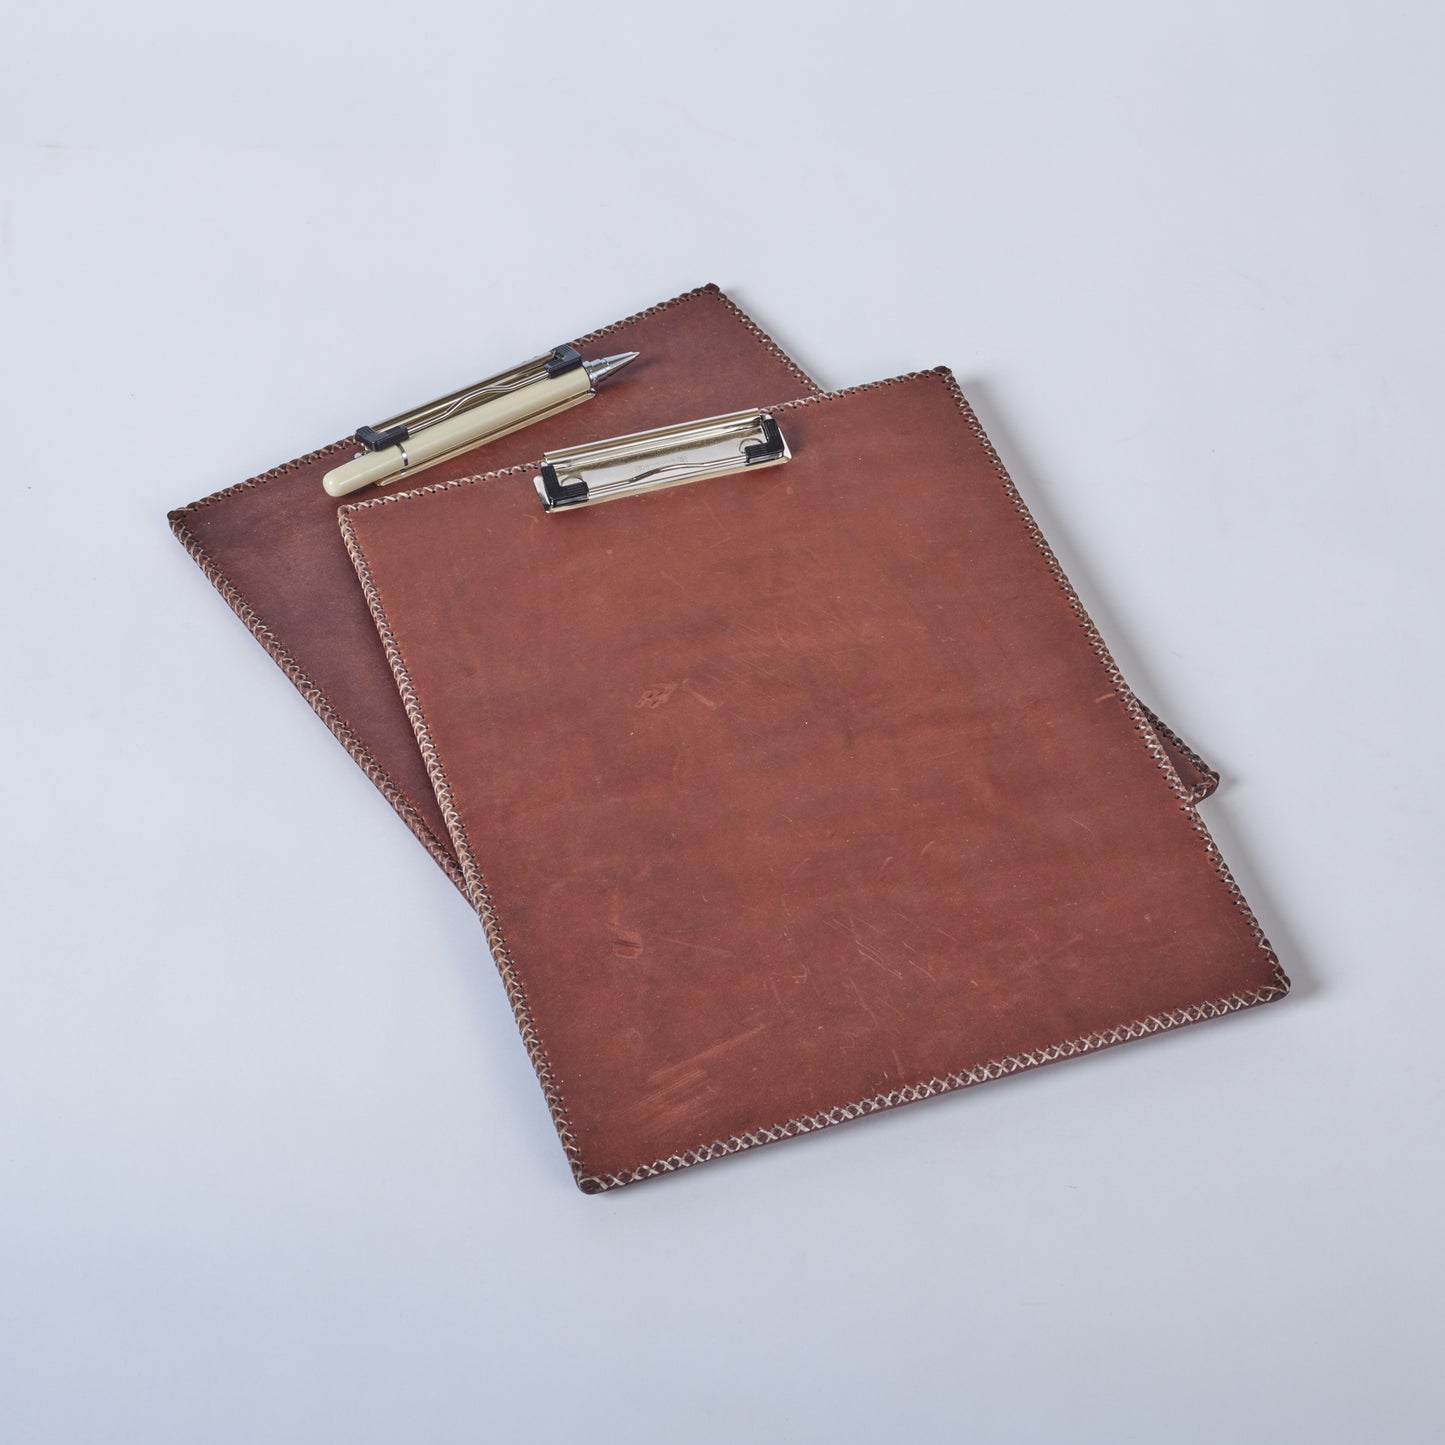 Leather Clipboard